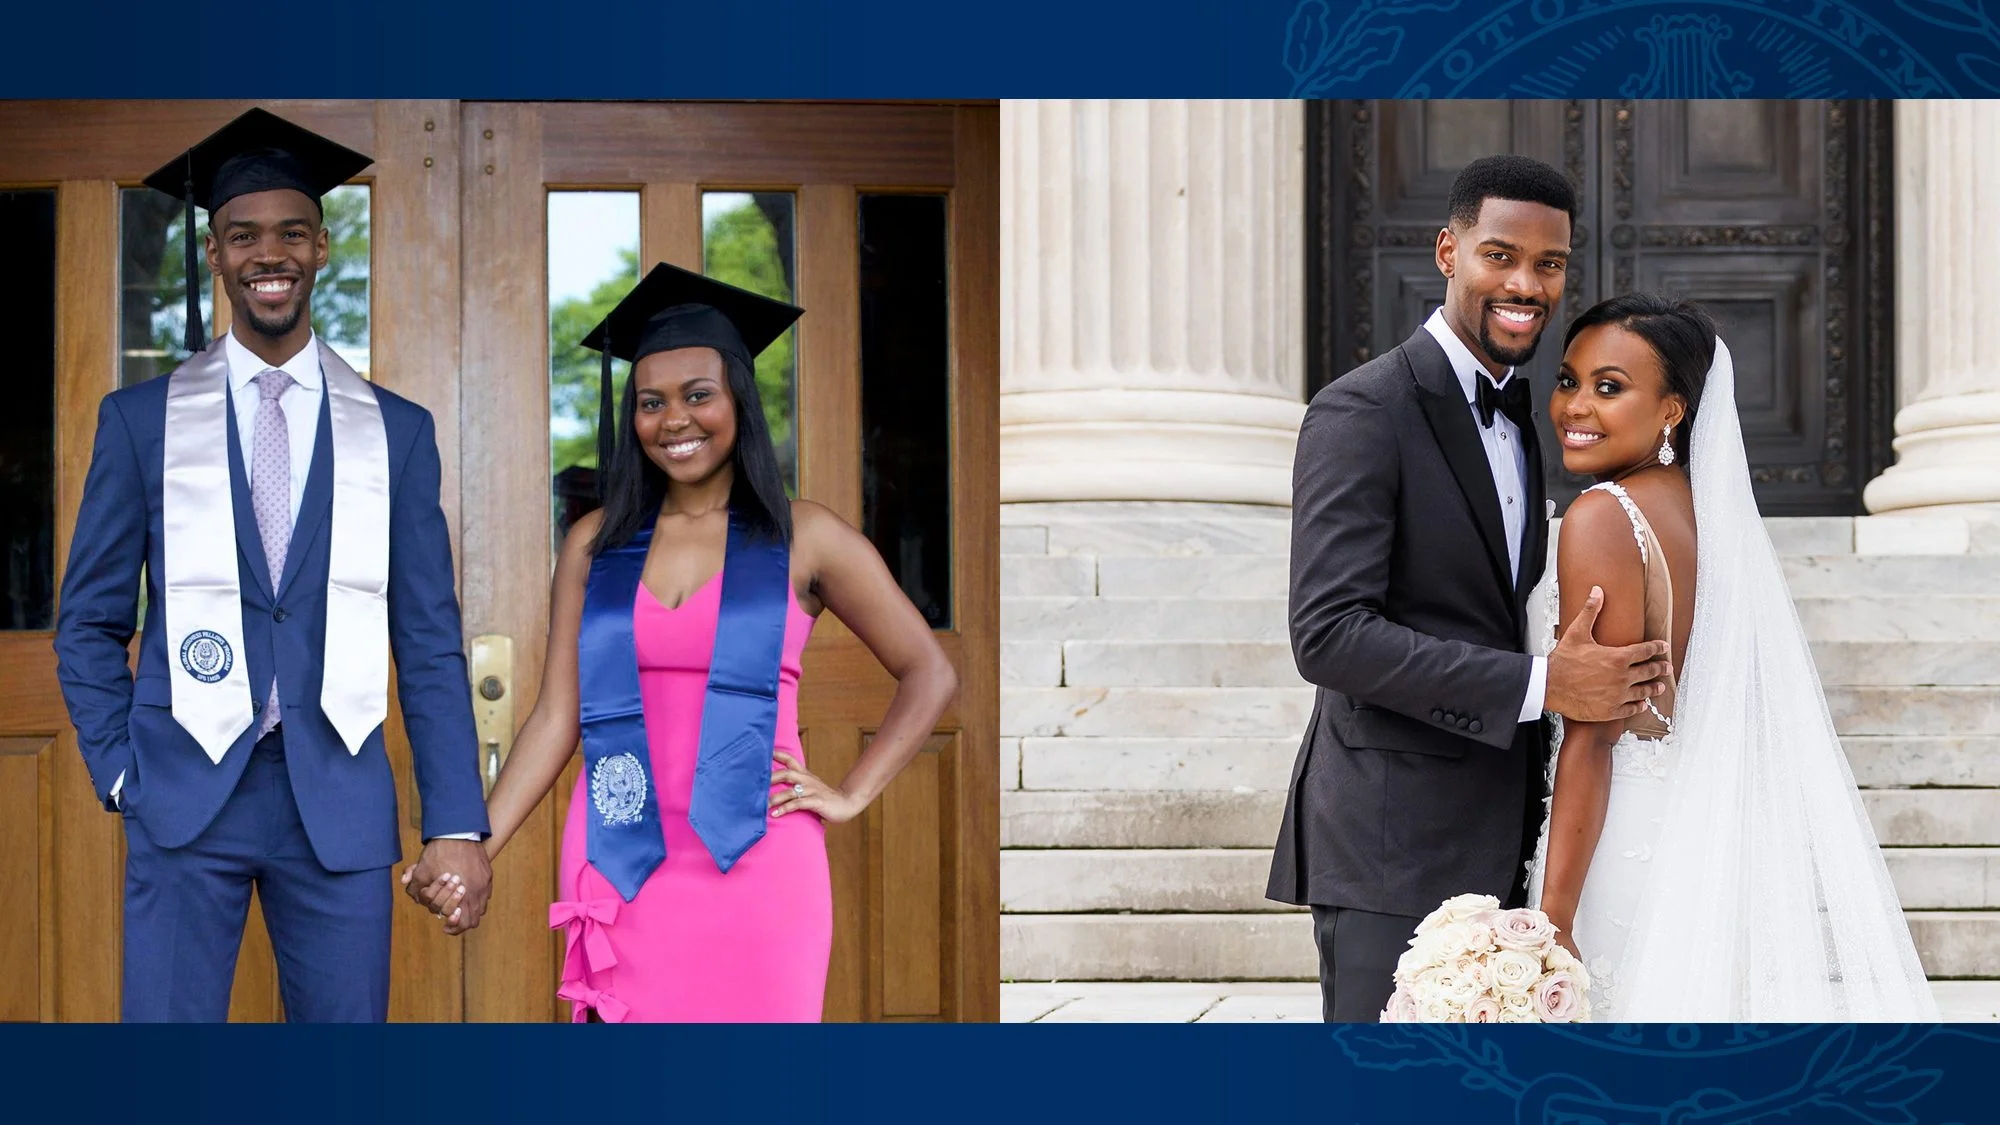 A couple is depicted in two pictures. In the first, they wear formal clothing and their graduation caps. They stand in front of Healy Hall. In the second photo, the same couple is wearing wedding attire.